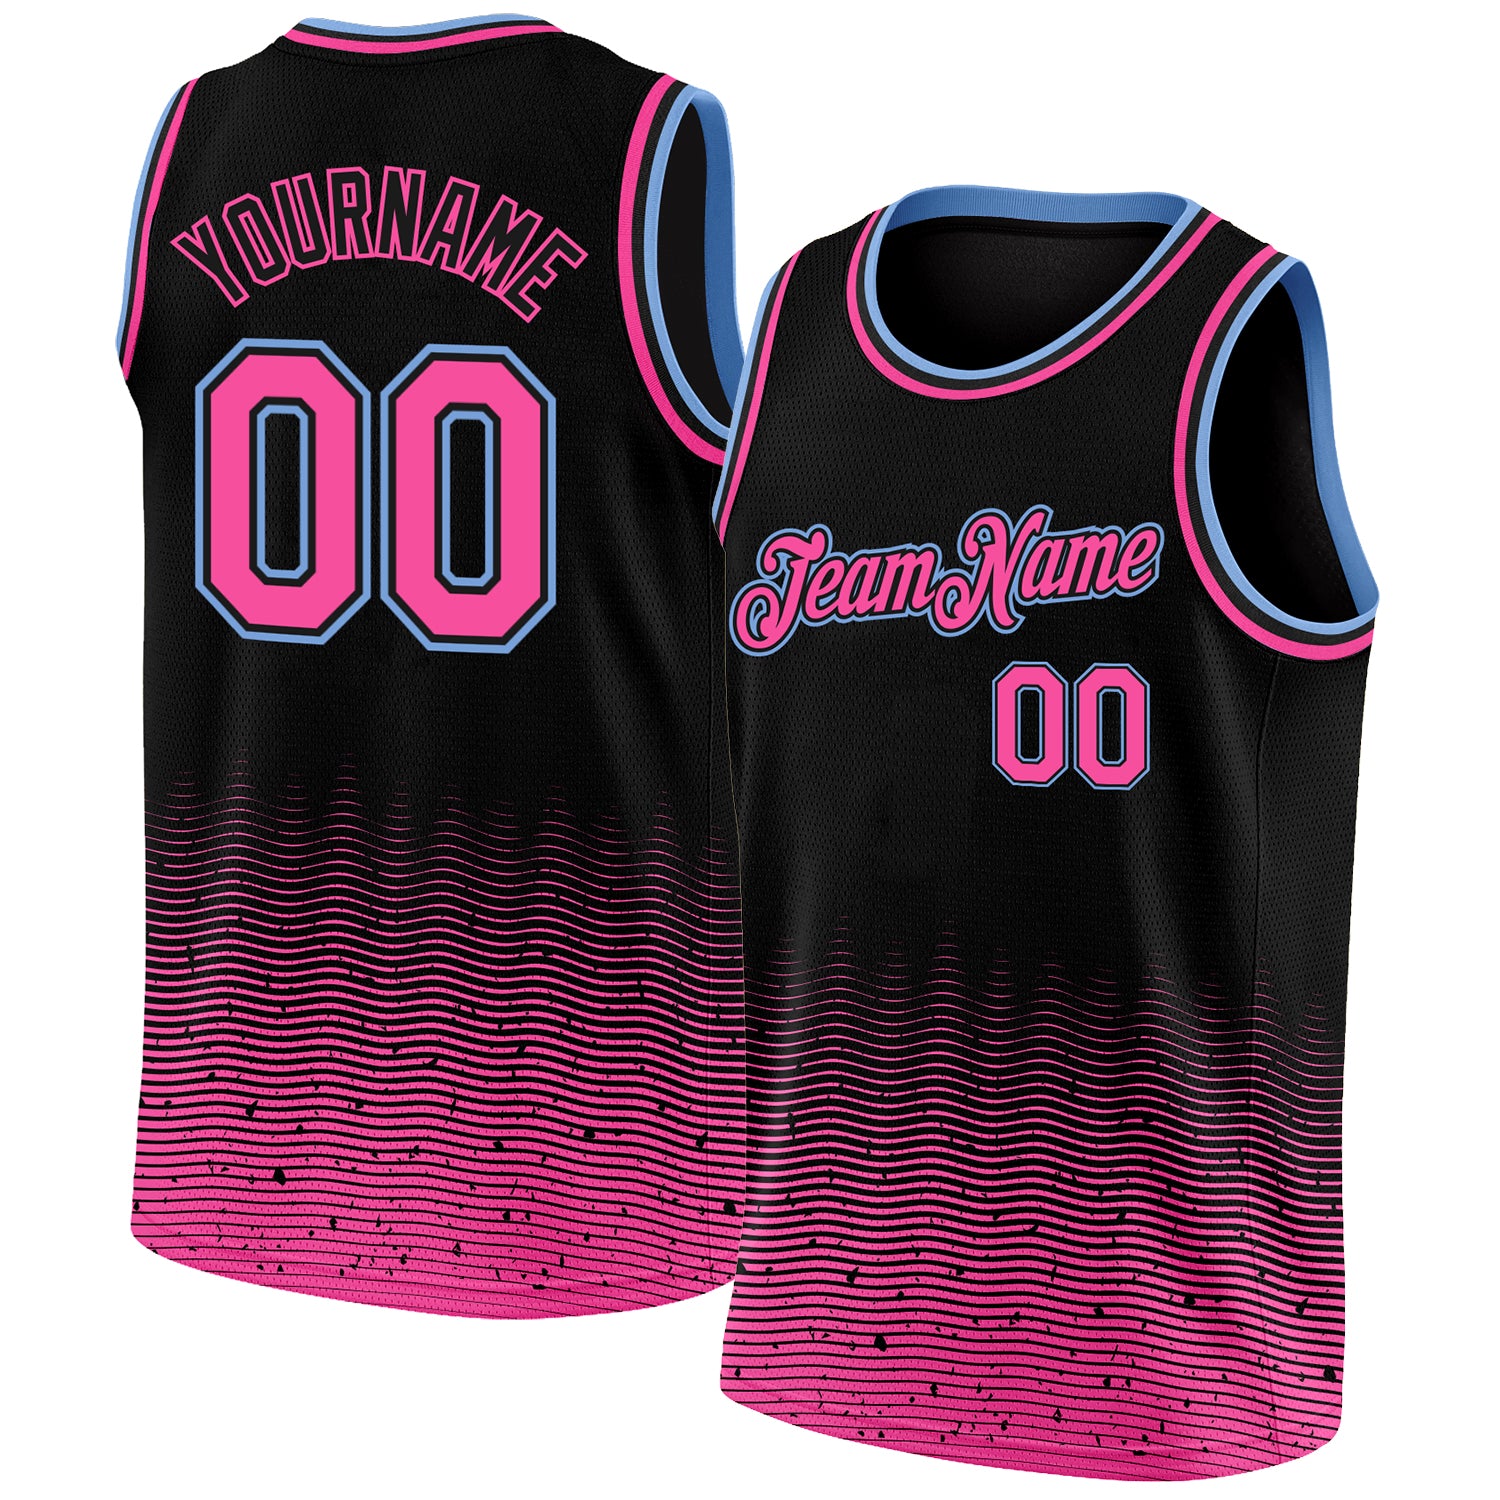 BLCKPINK NEW BASKETBALL JERSEY FREE CUSTOMIZE NAME AND NUMBER FULL SUBLIMATION  JERSEY FANWEAR